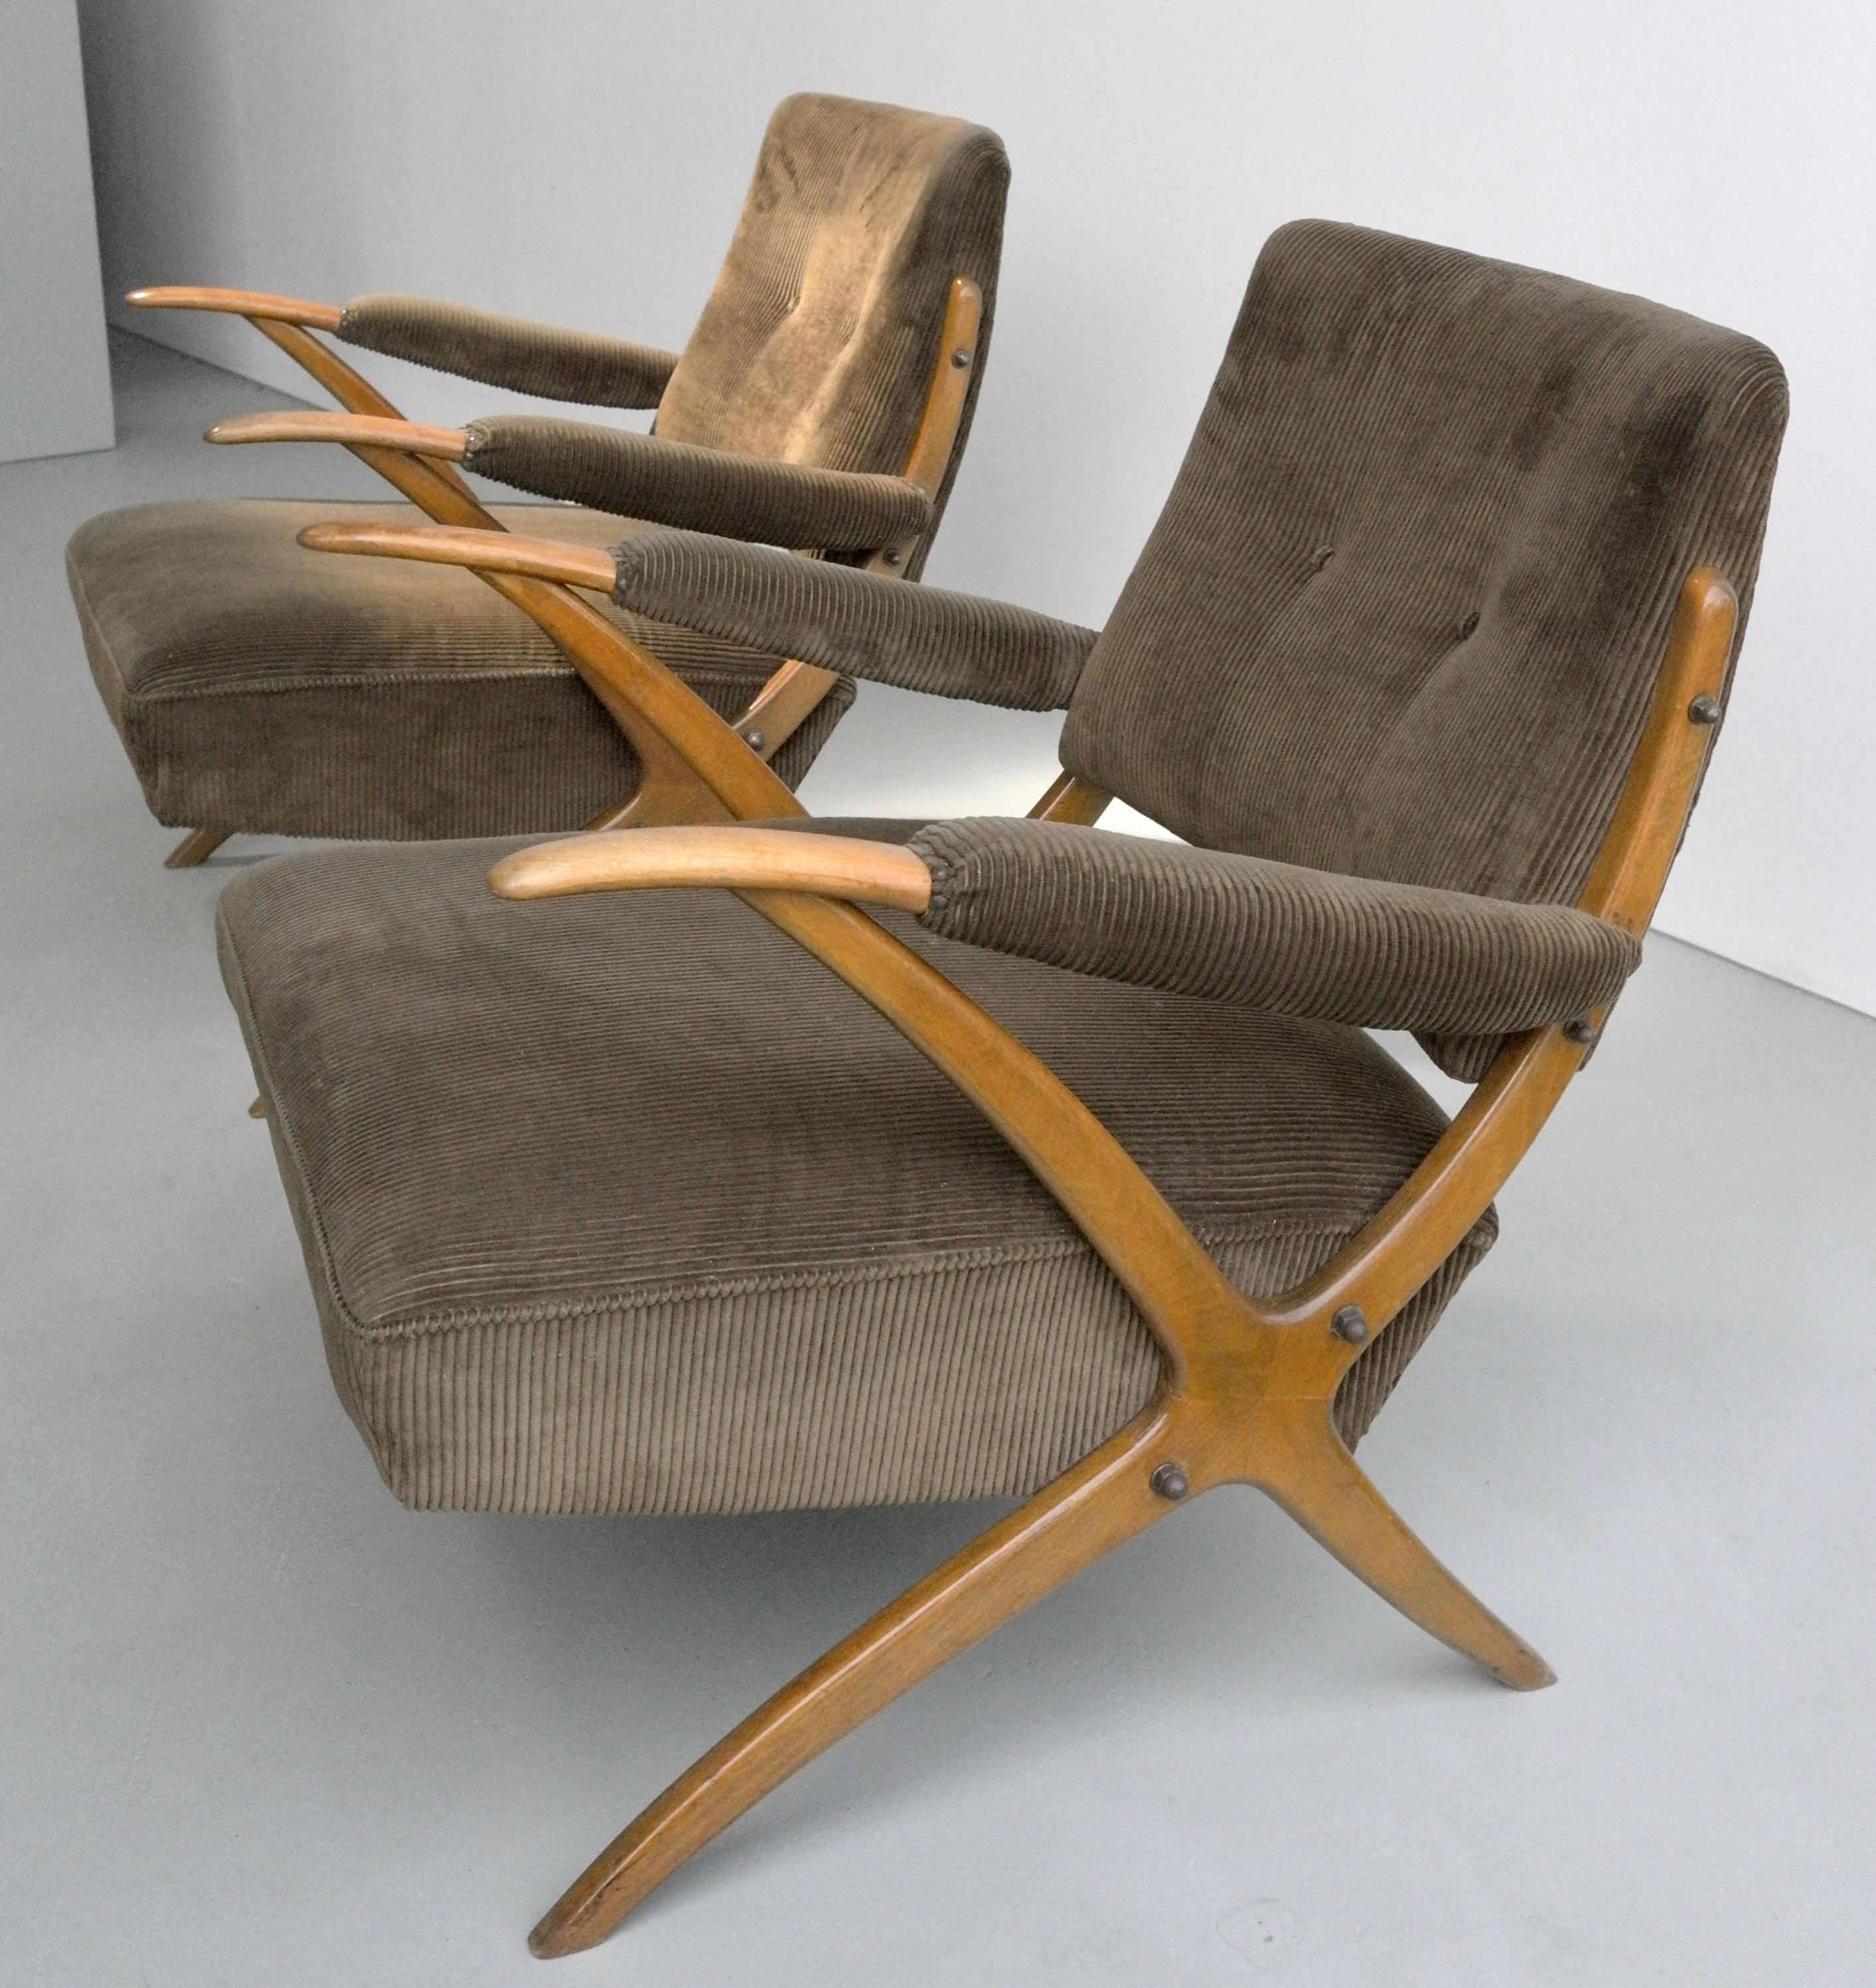 Exceptional cross-frame wooden lounge chairs, Italy, 1950s.
For the touch we kept the original upholstery from this rare pair of lounge chairs.
Imagine these with a velvet-abundant upholstery, suitable in any midcentury or modern interior.